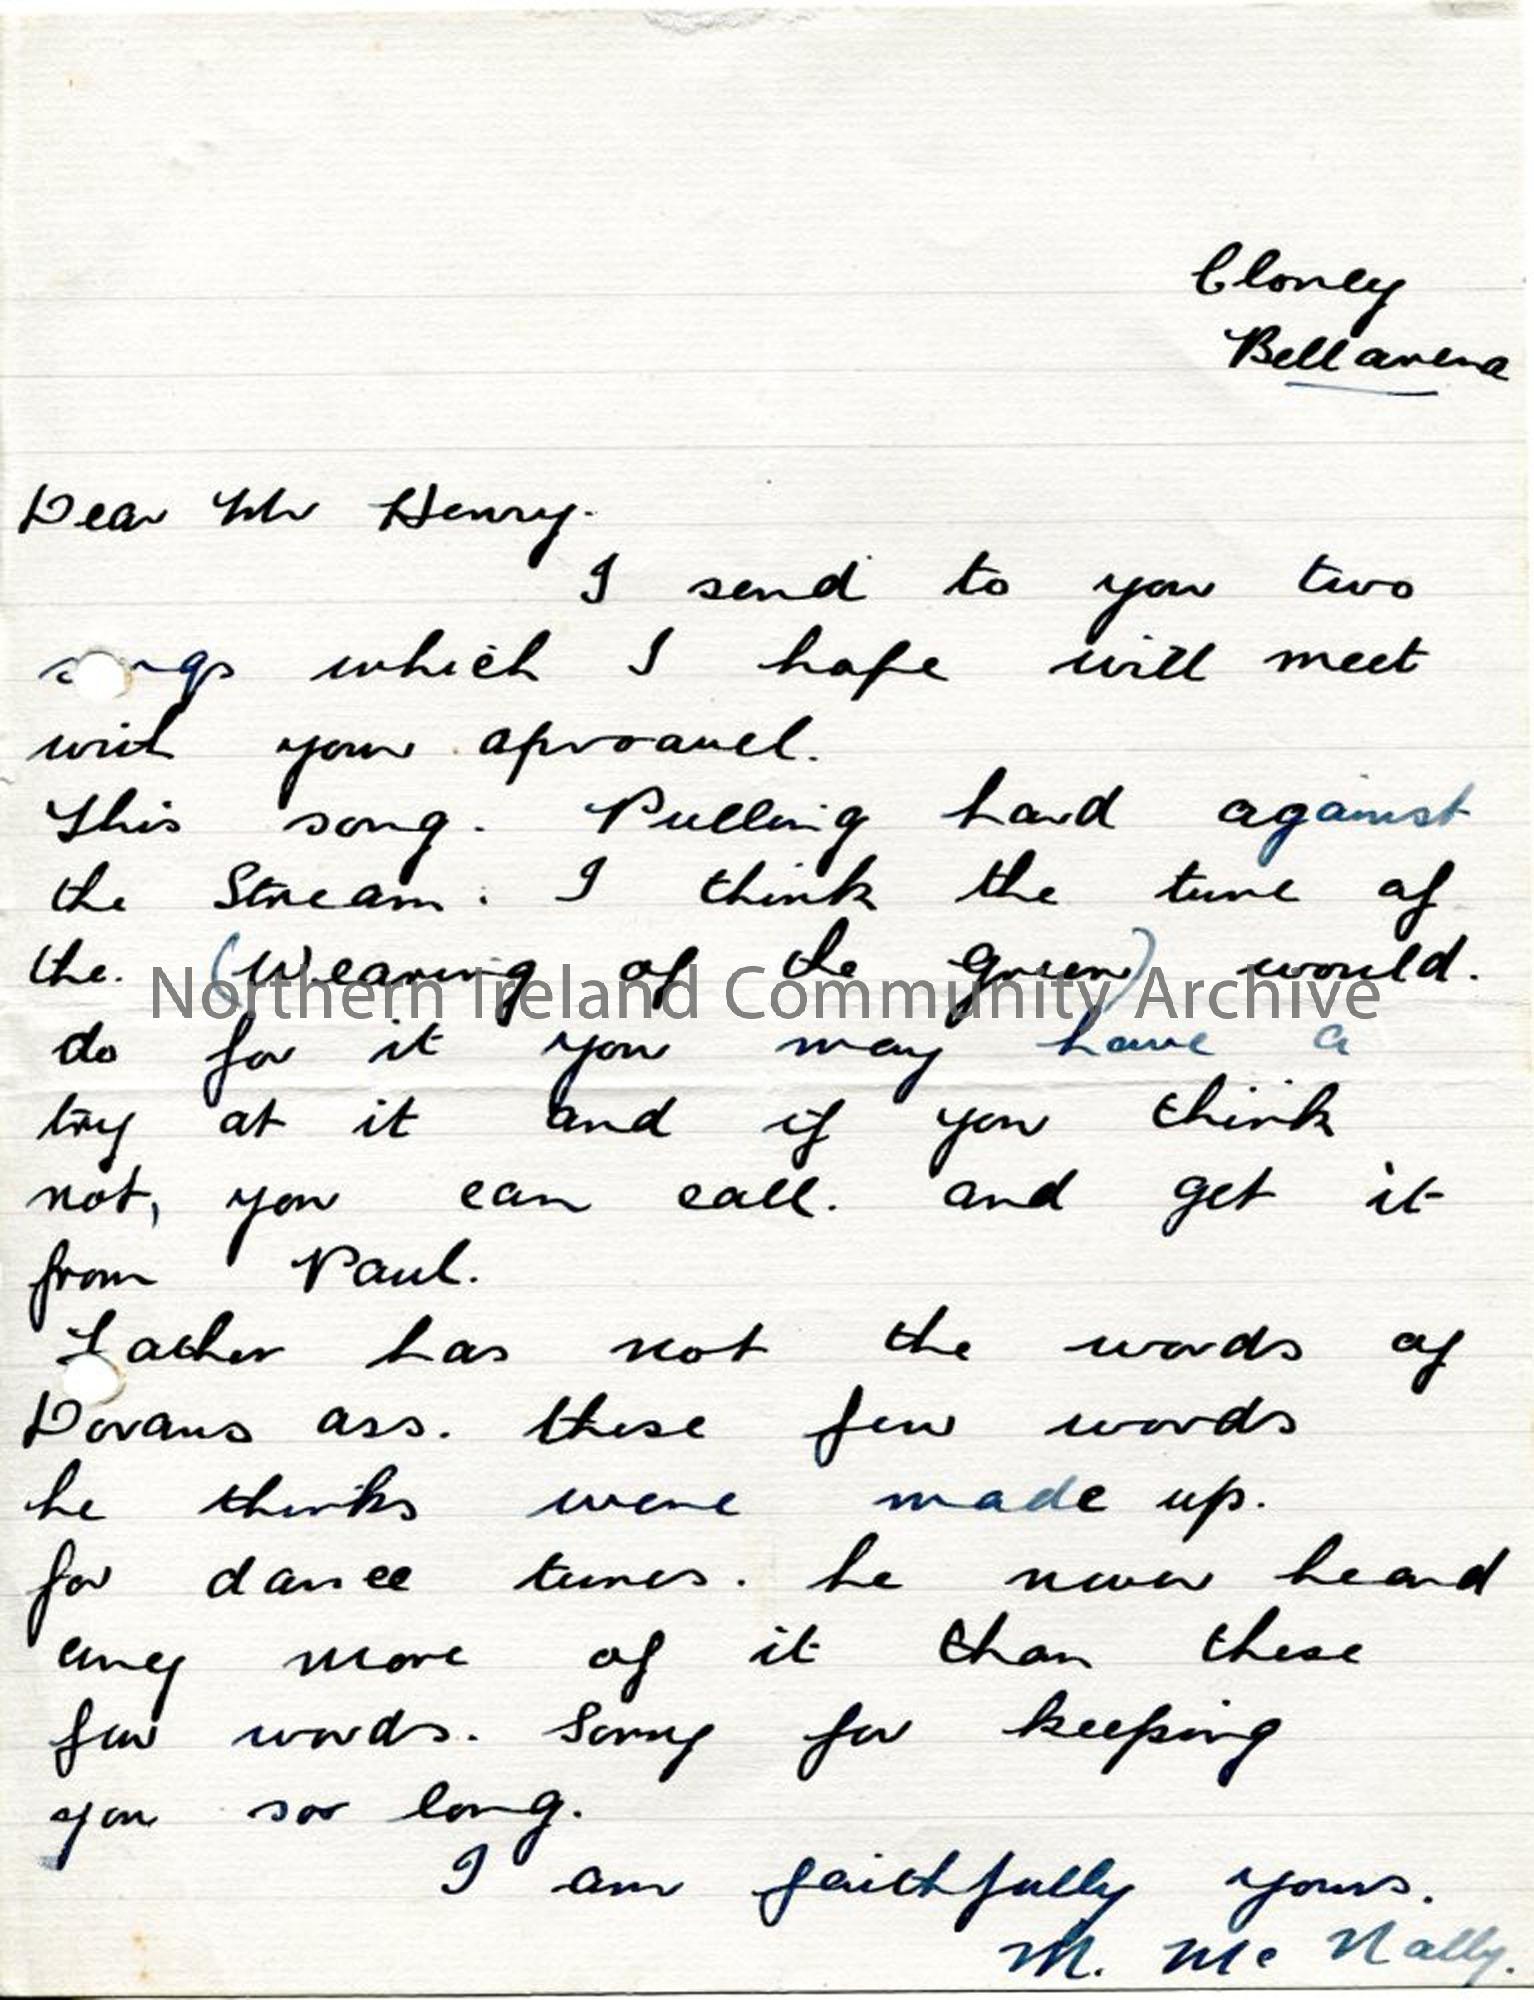 Handwritten letter by M. McNally